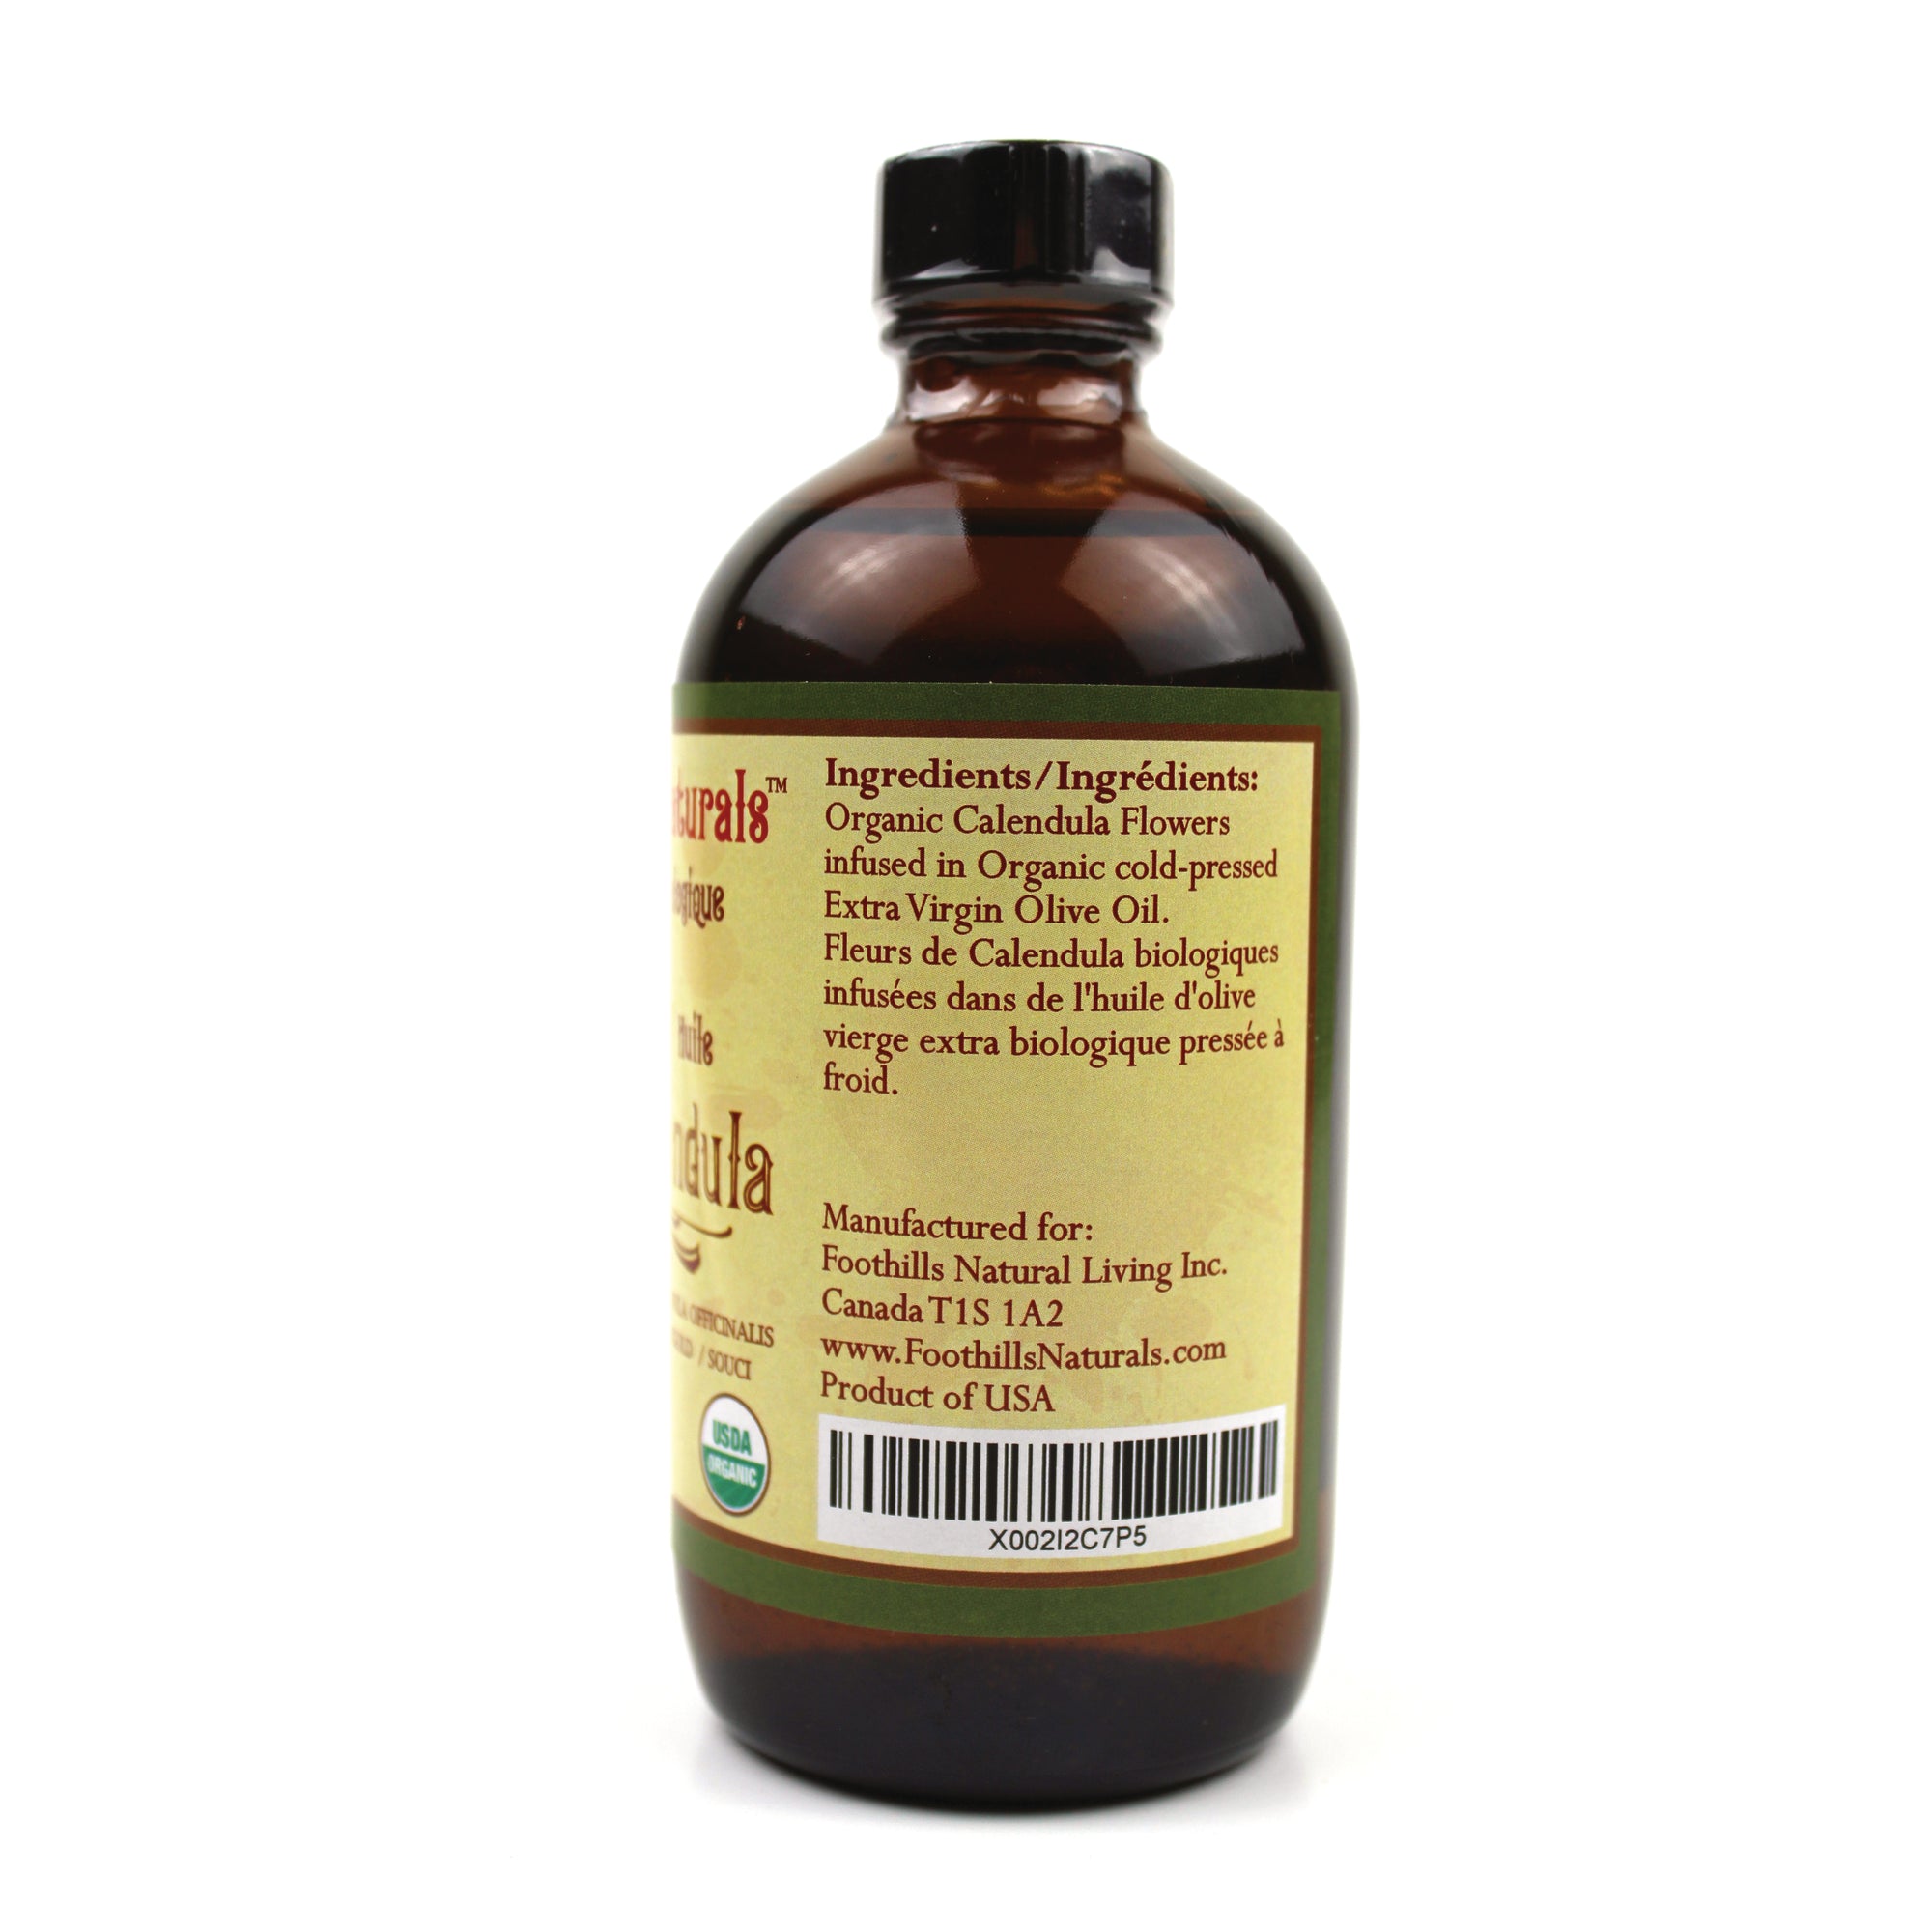 Calendula Oil Organic - 8.8 oz (250mg) Infused in Organic Cold Pressed Virgin Olive Oil | Foothills Naturals Canada | Ancient Herbs for Modern Use